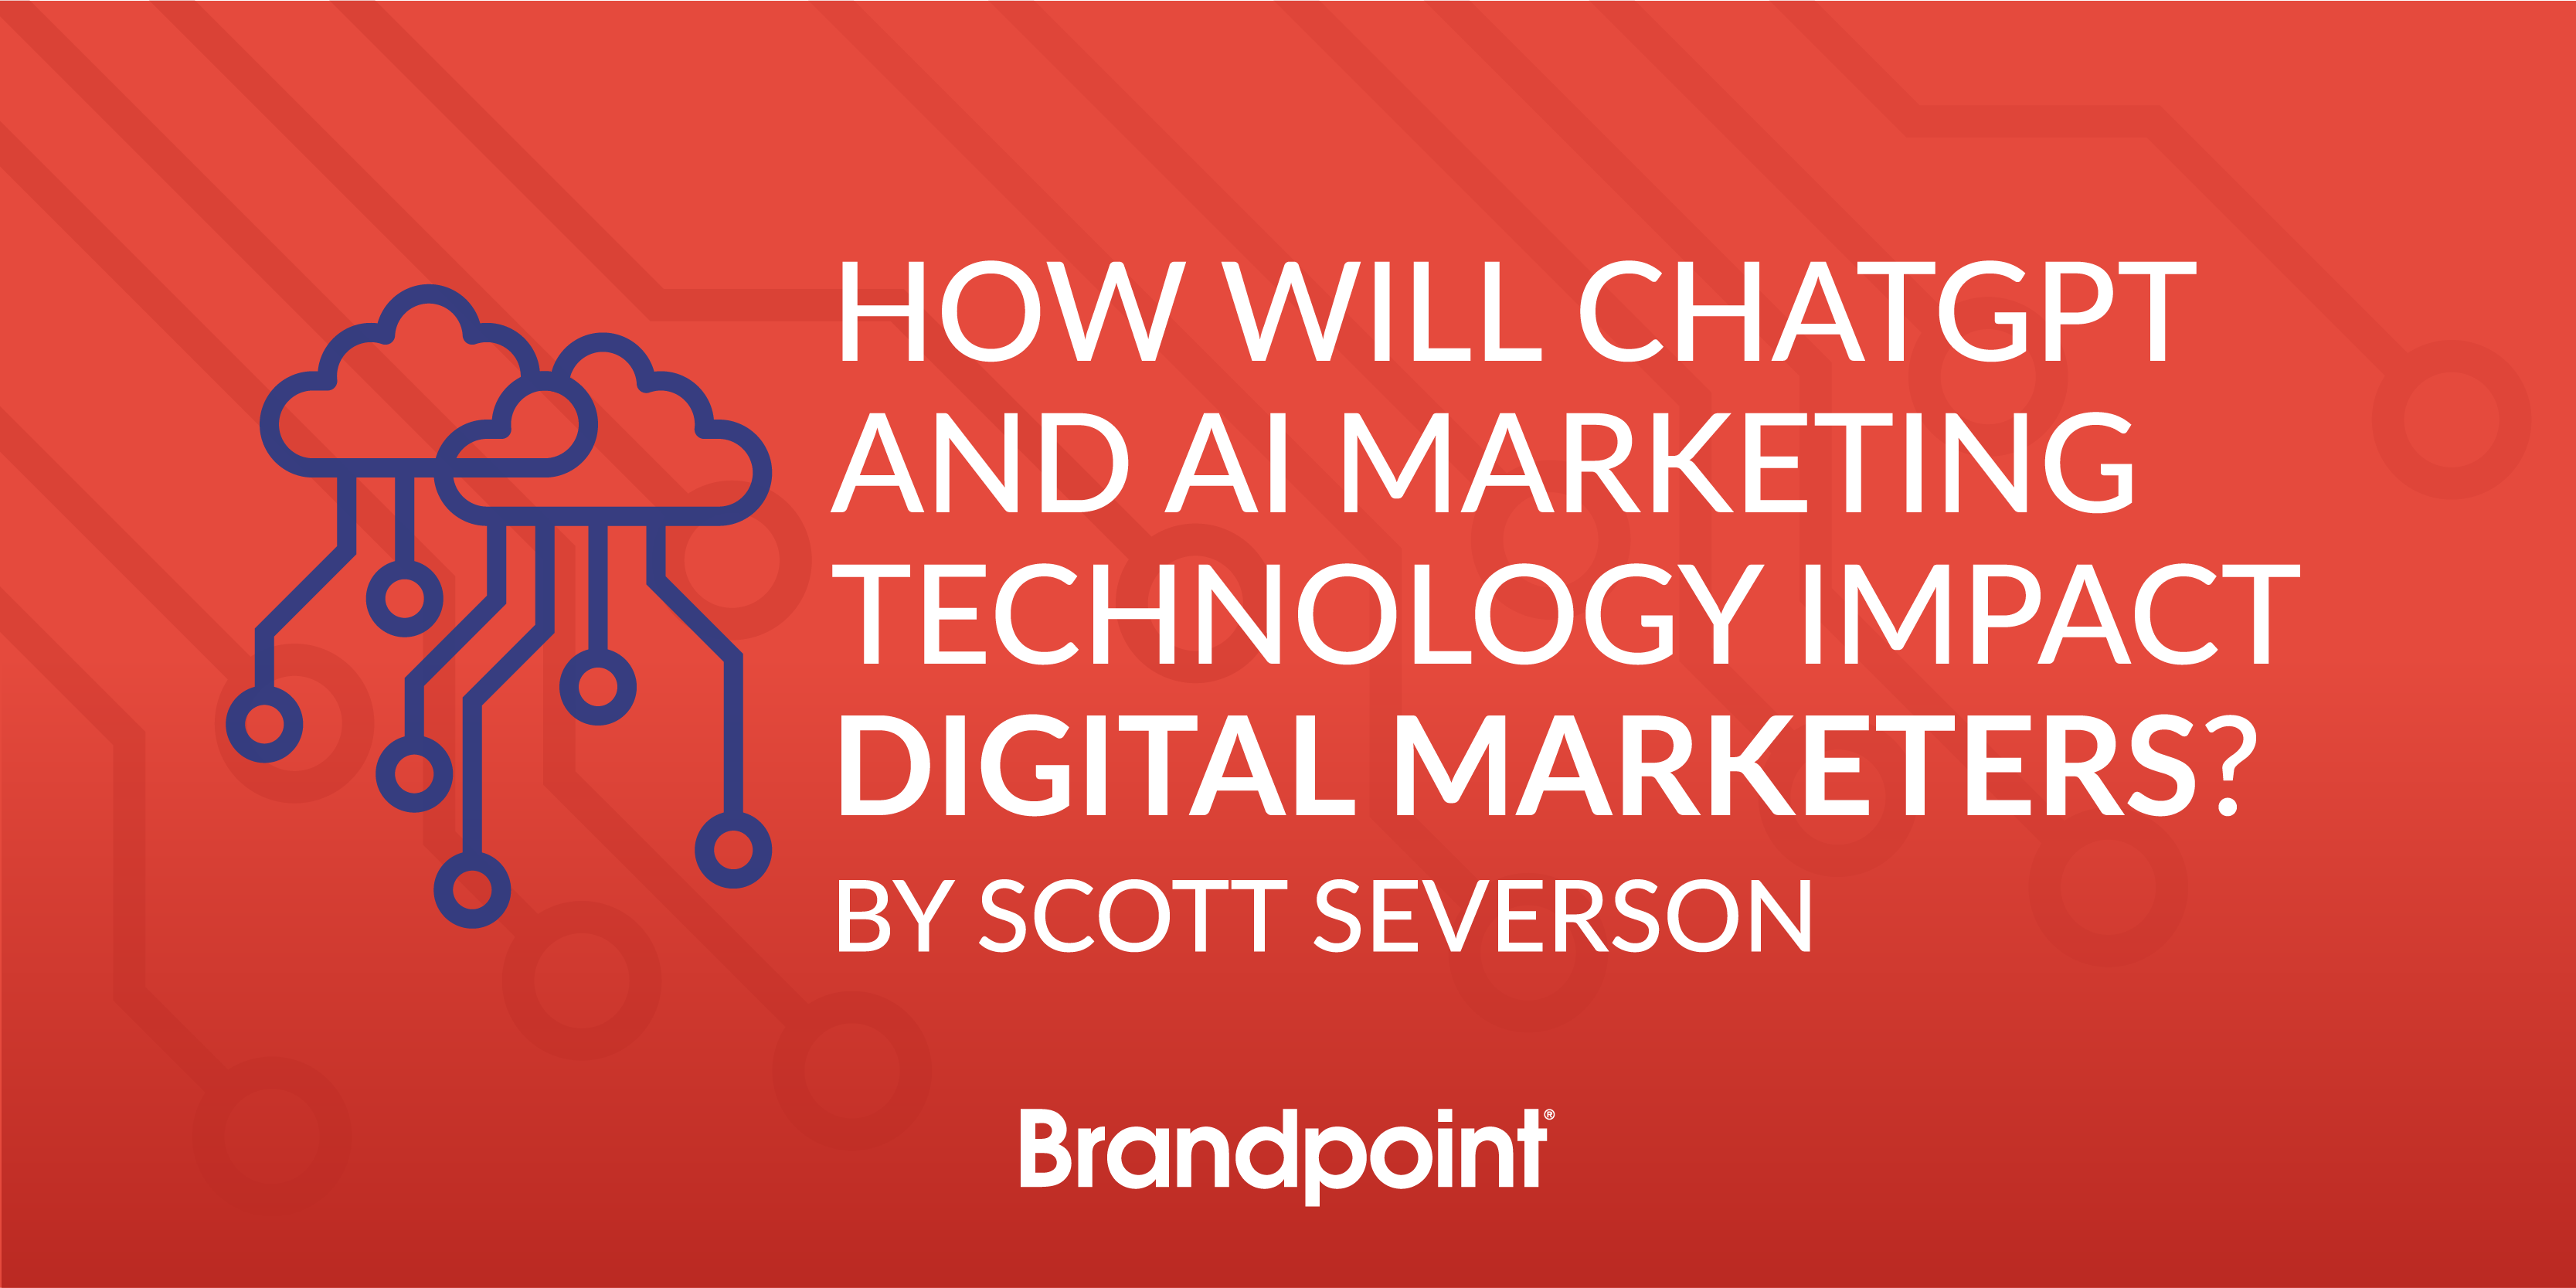 A header image with the blog title "How Will AI Marketing and ChatGPT Technology Impact Digital Marketing?" with blue icons of clouds with robot tendrils.